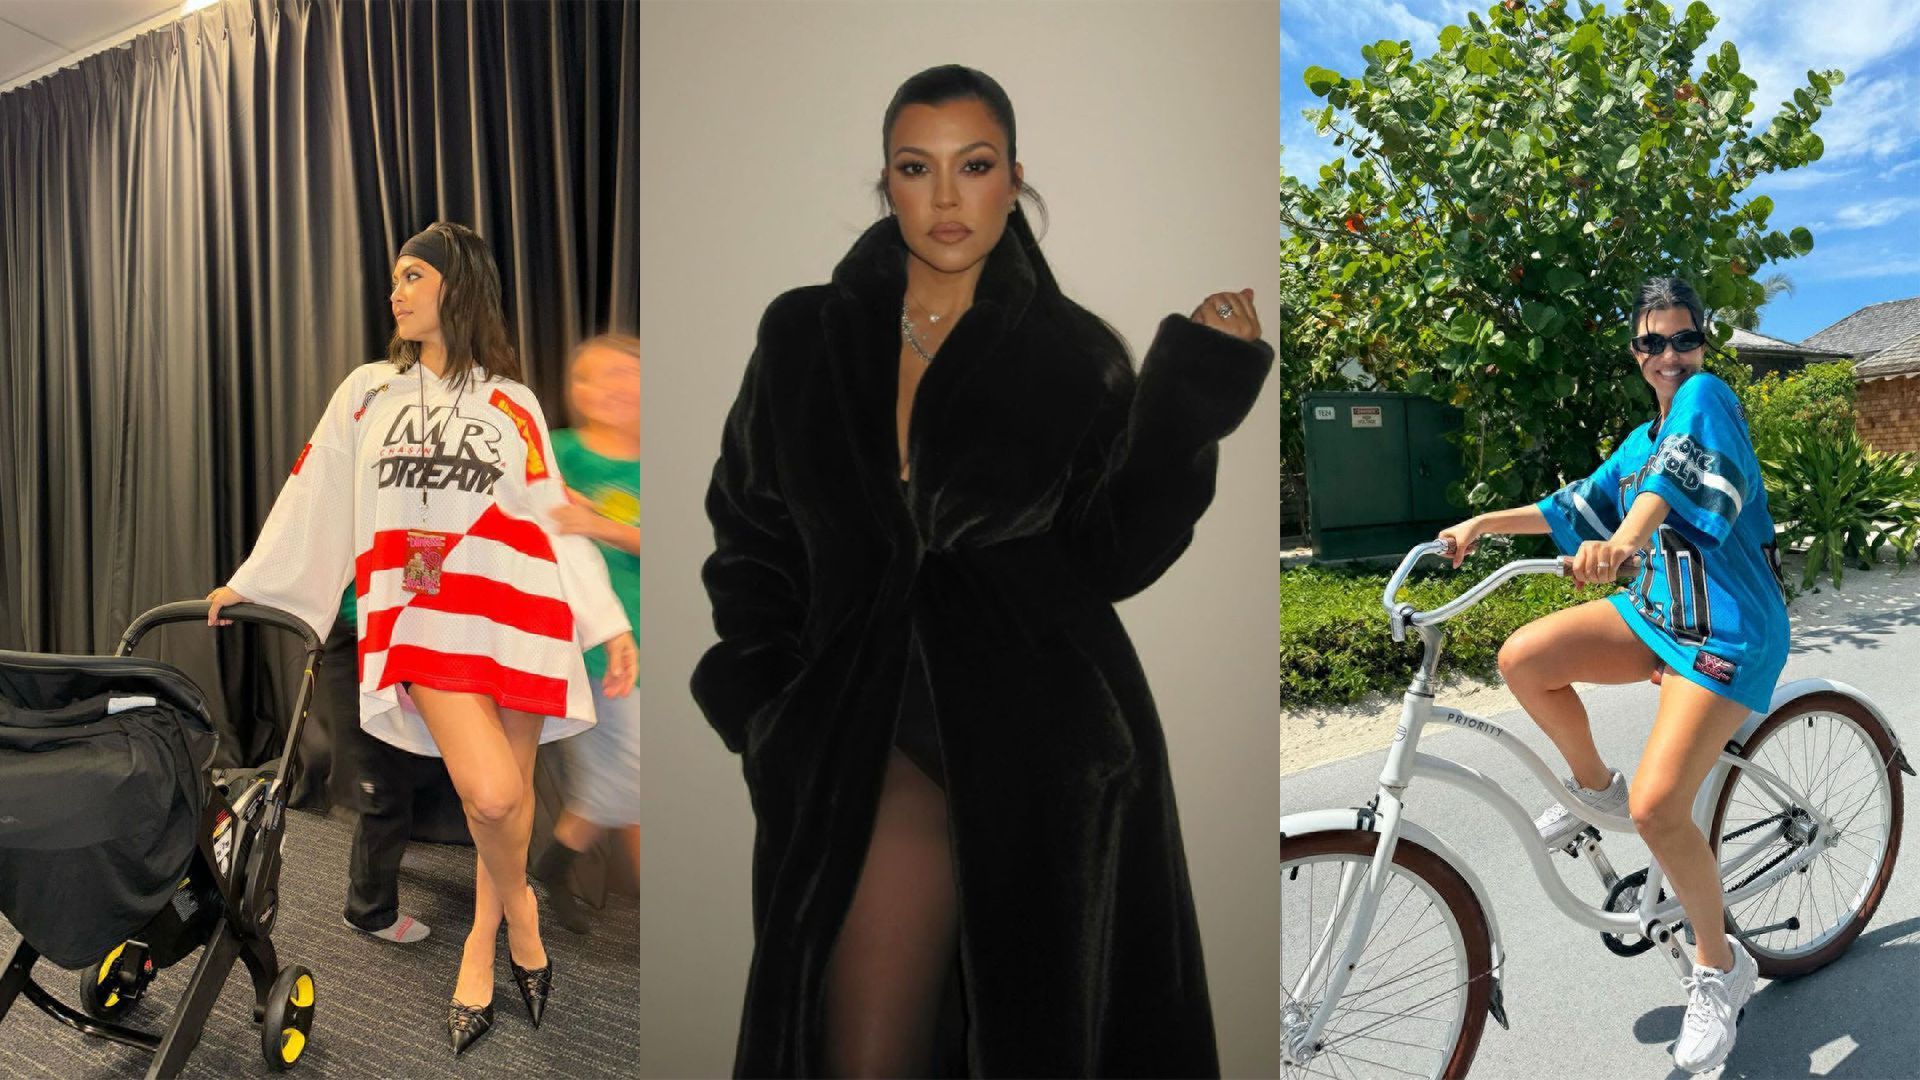 LtoR: Kourtney wears red and poses with a pram, Kourtney in a fur coat, and Kourtney on a bike in a blue shirt